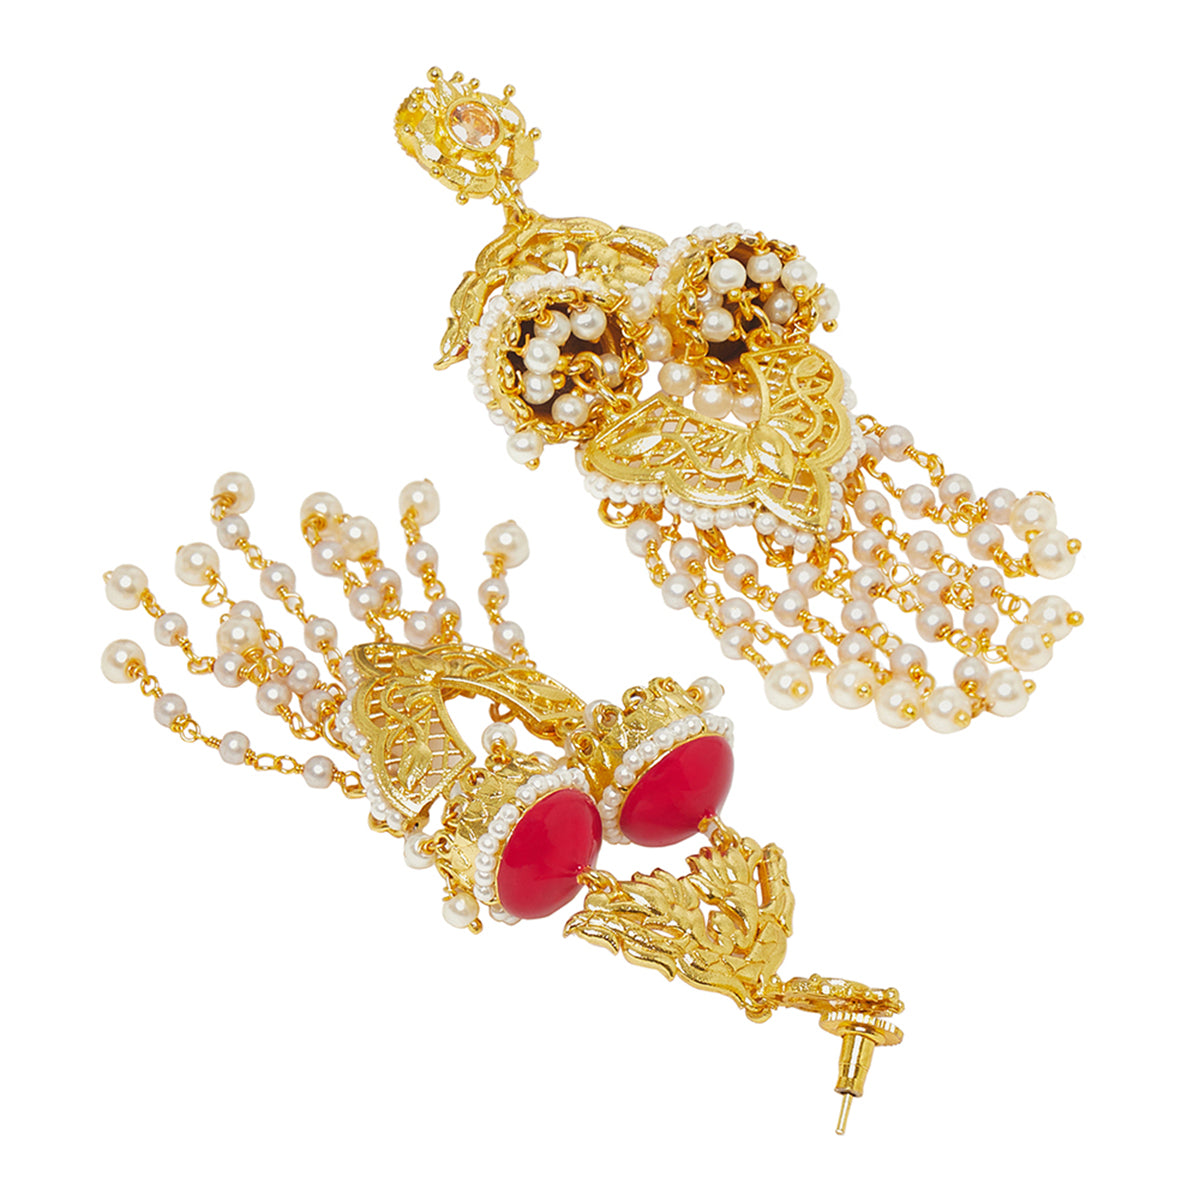 Apsara Dye Gold Earrings with Red Jhumkis and Beaded Chains